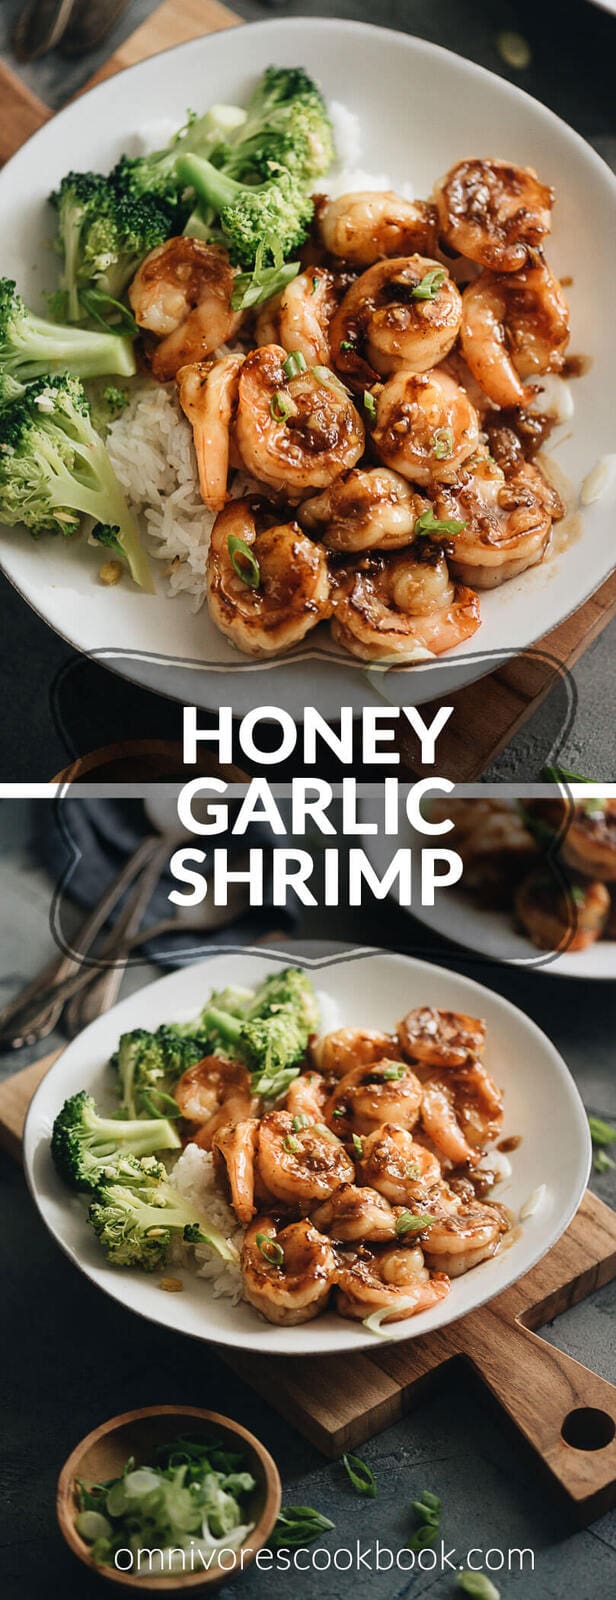 Honey Garlic Shrimp - Learn how to make a healthy honey garlic shrimp stir fry with less sugar and sodium, but more flavor. Serve it on steamed rice with broccoli, and you’ll have dinner ready in 20 minutes! #stirfry #takeout #chinese #easy #glutenfree